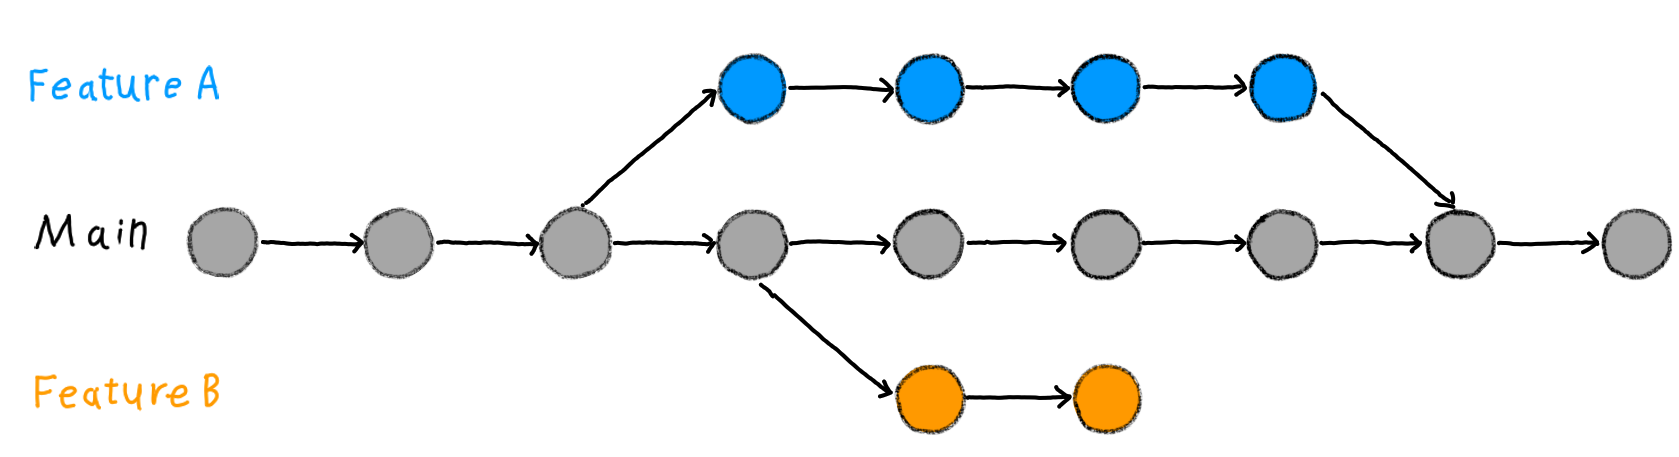 Two feature branches and one main branch in Git.